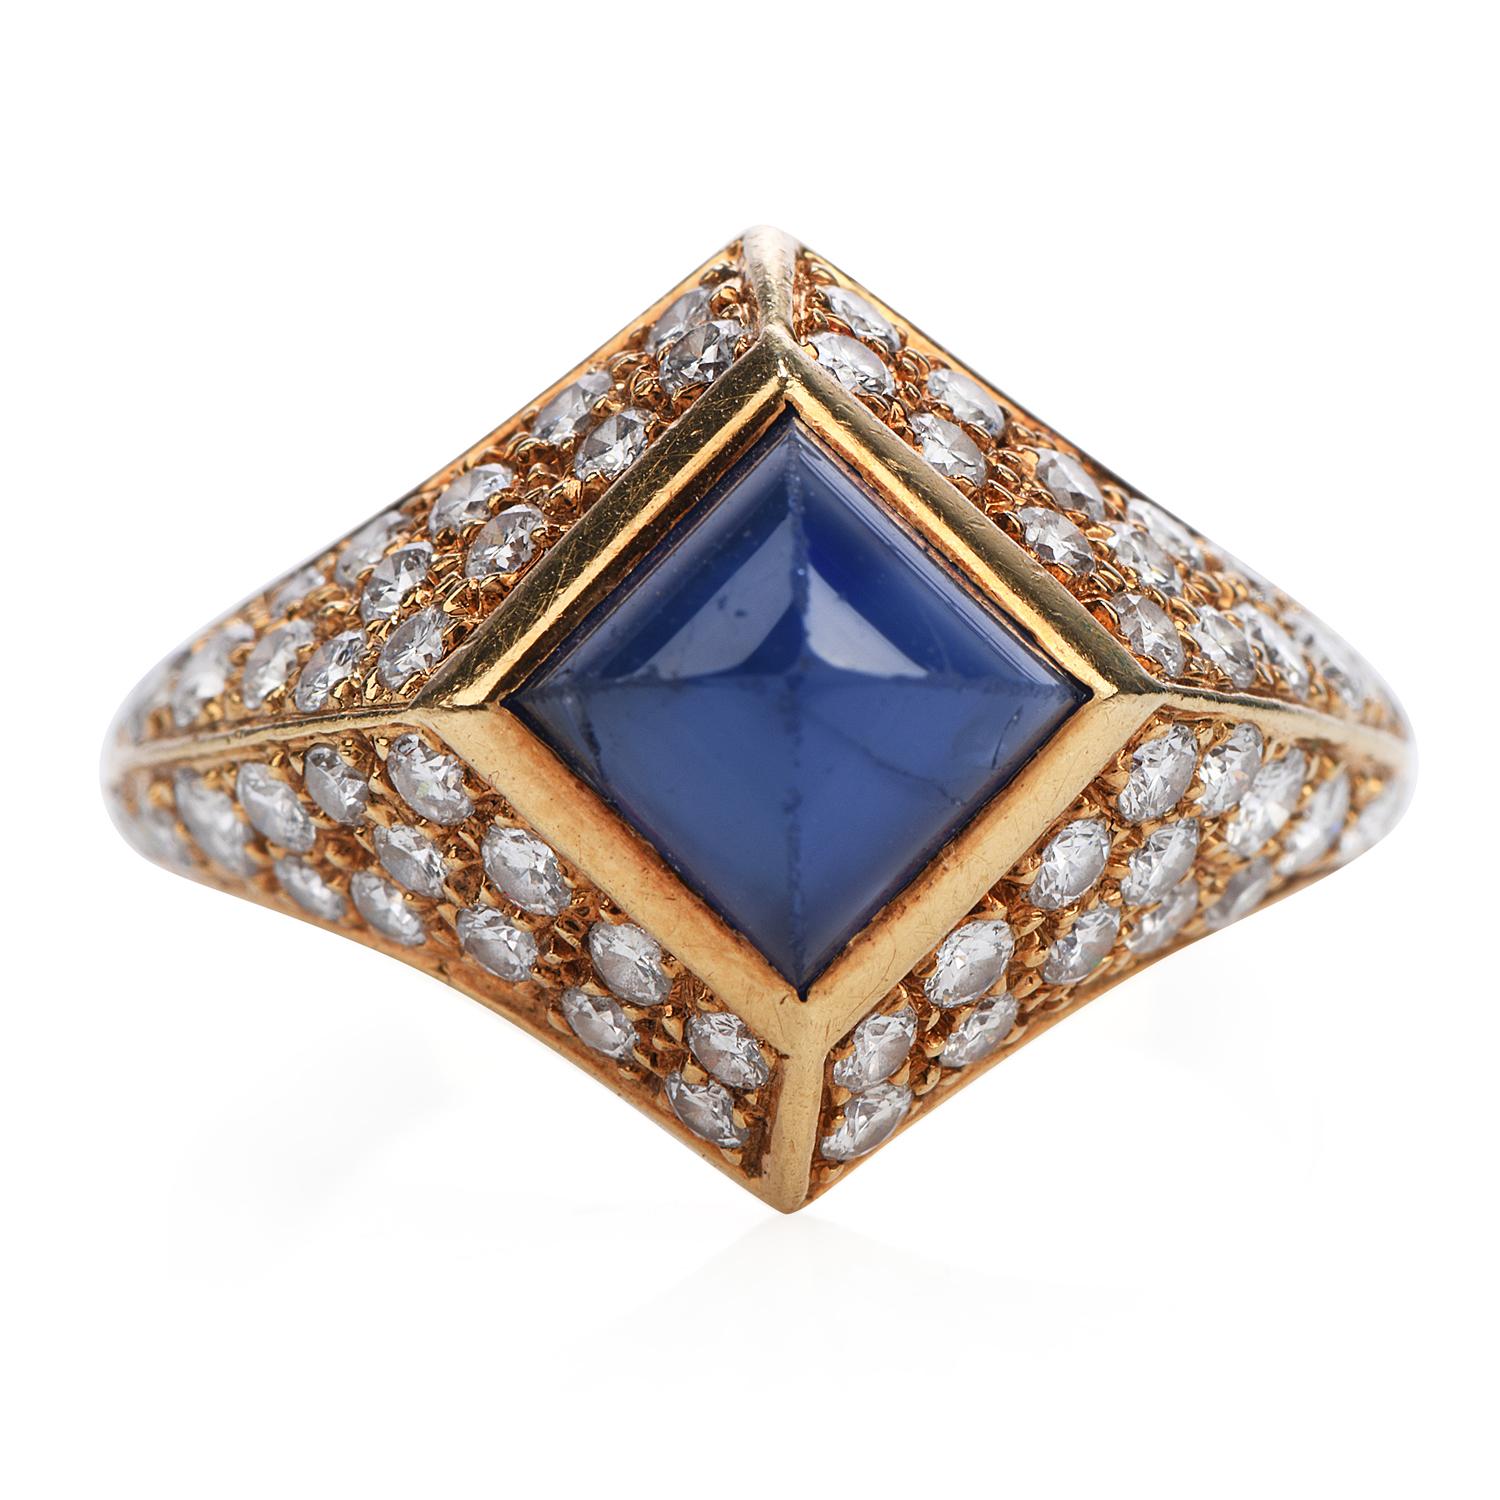 Shine brightly with this French-made vivid Vintage Burma natural sapphire Diamond 18K Gold pave Ring!  This ring had 1 scintillating Genuine Natural No heat Suger loaf shapesapphire with Burma origin and AGL lab Report, bezel-set Weighing approx.